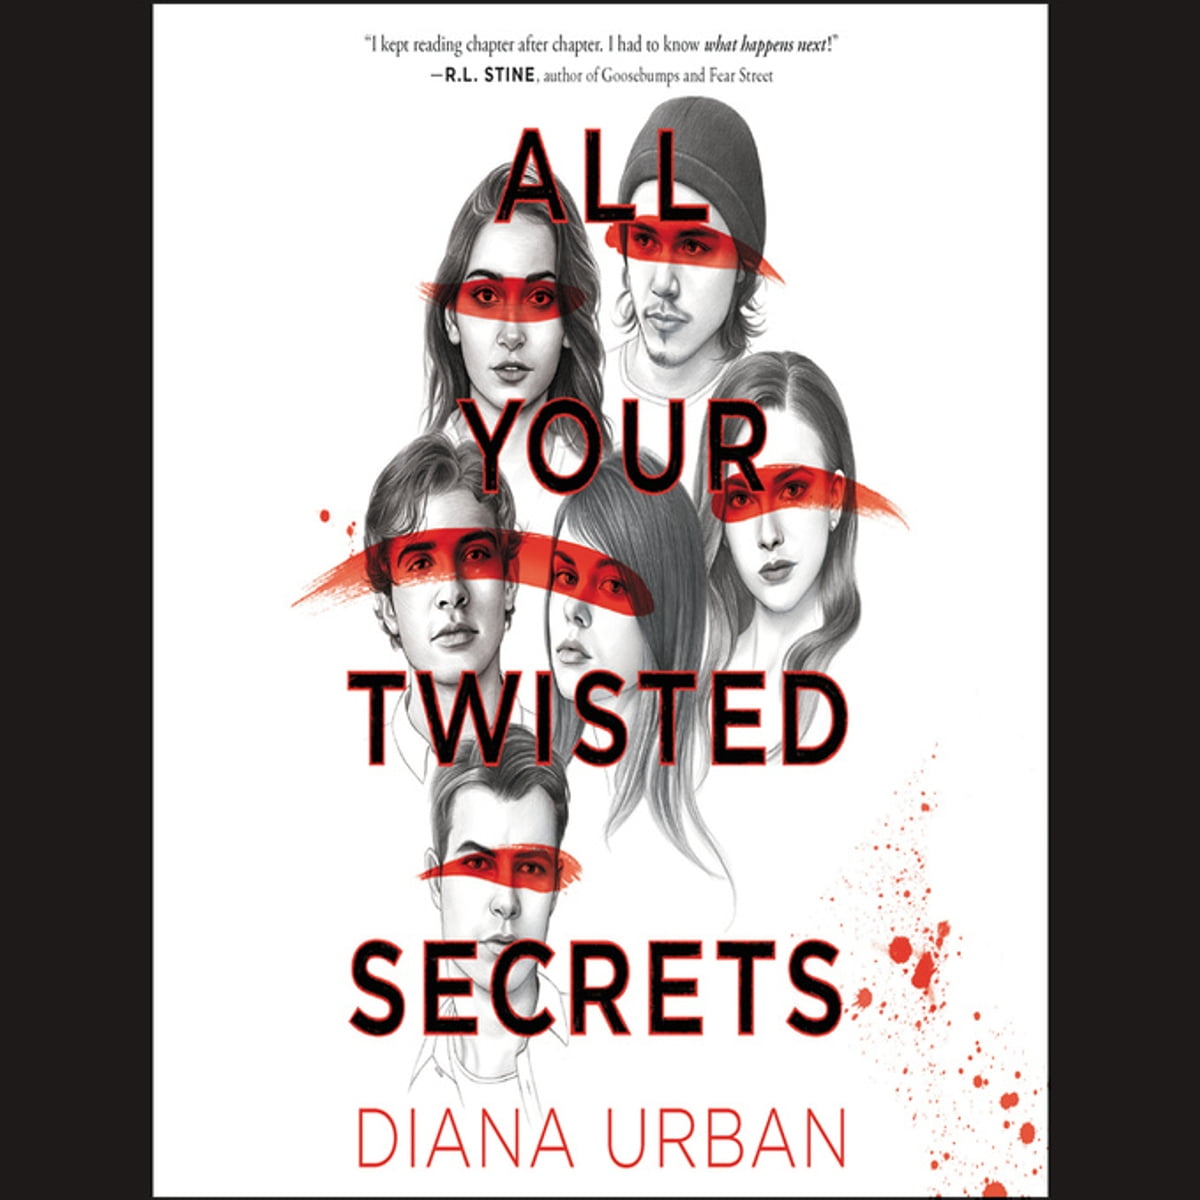 All your twisted secrets